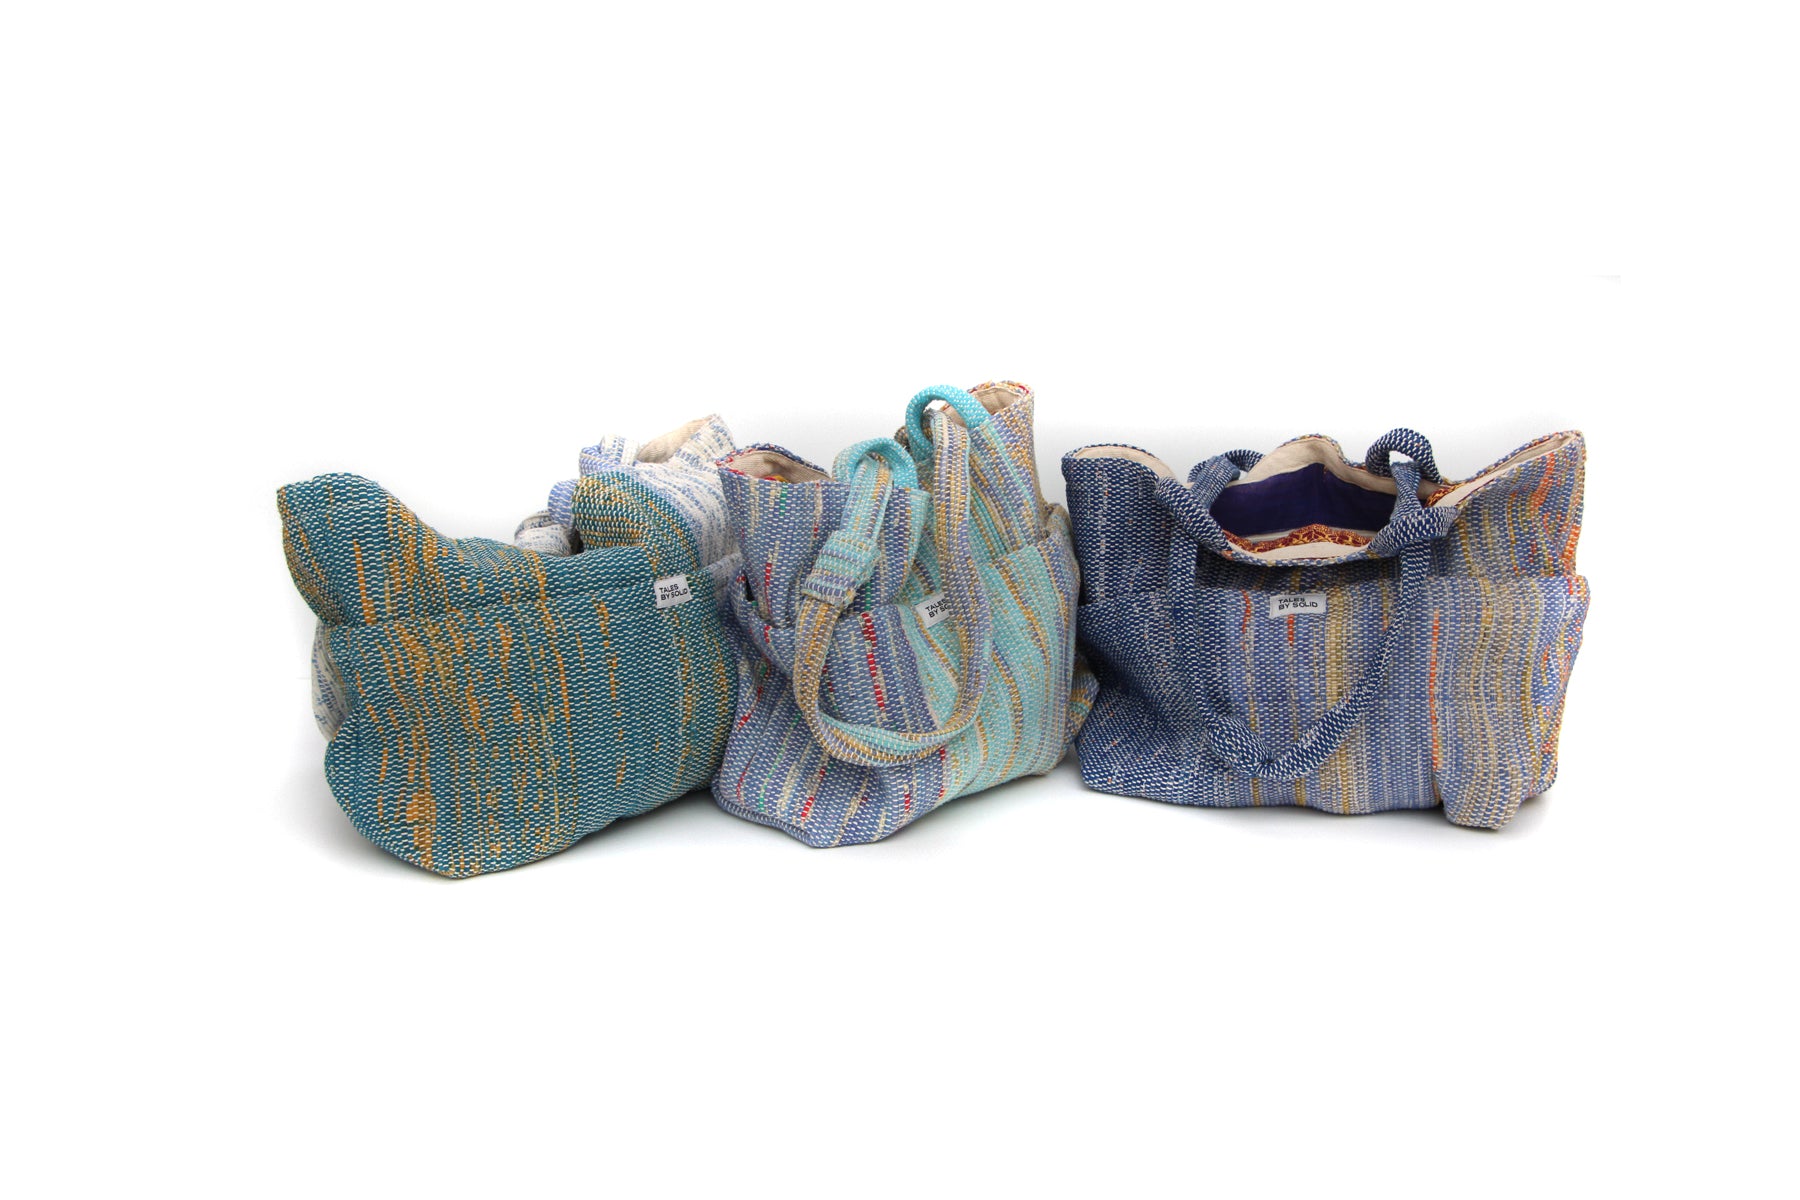 Small Sari Bag 04 - Handcrafted Elegance with a Sustainable Story